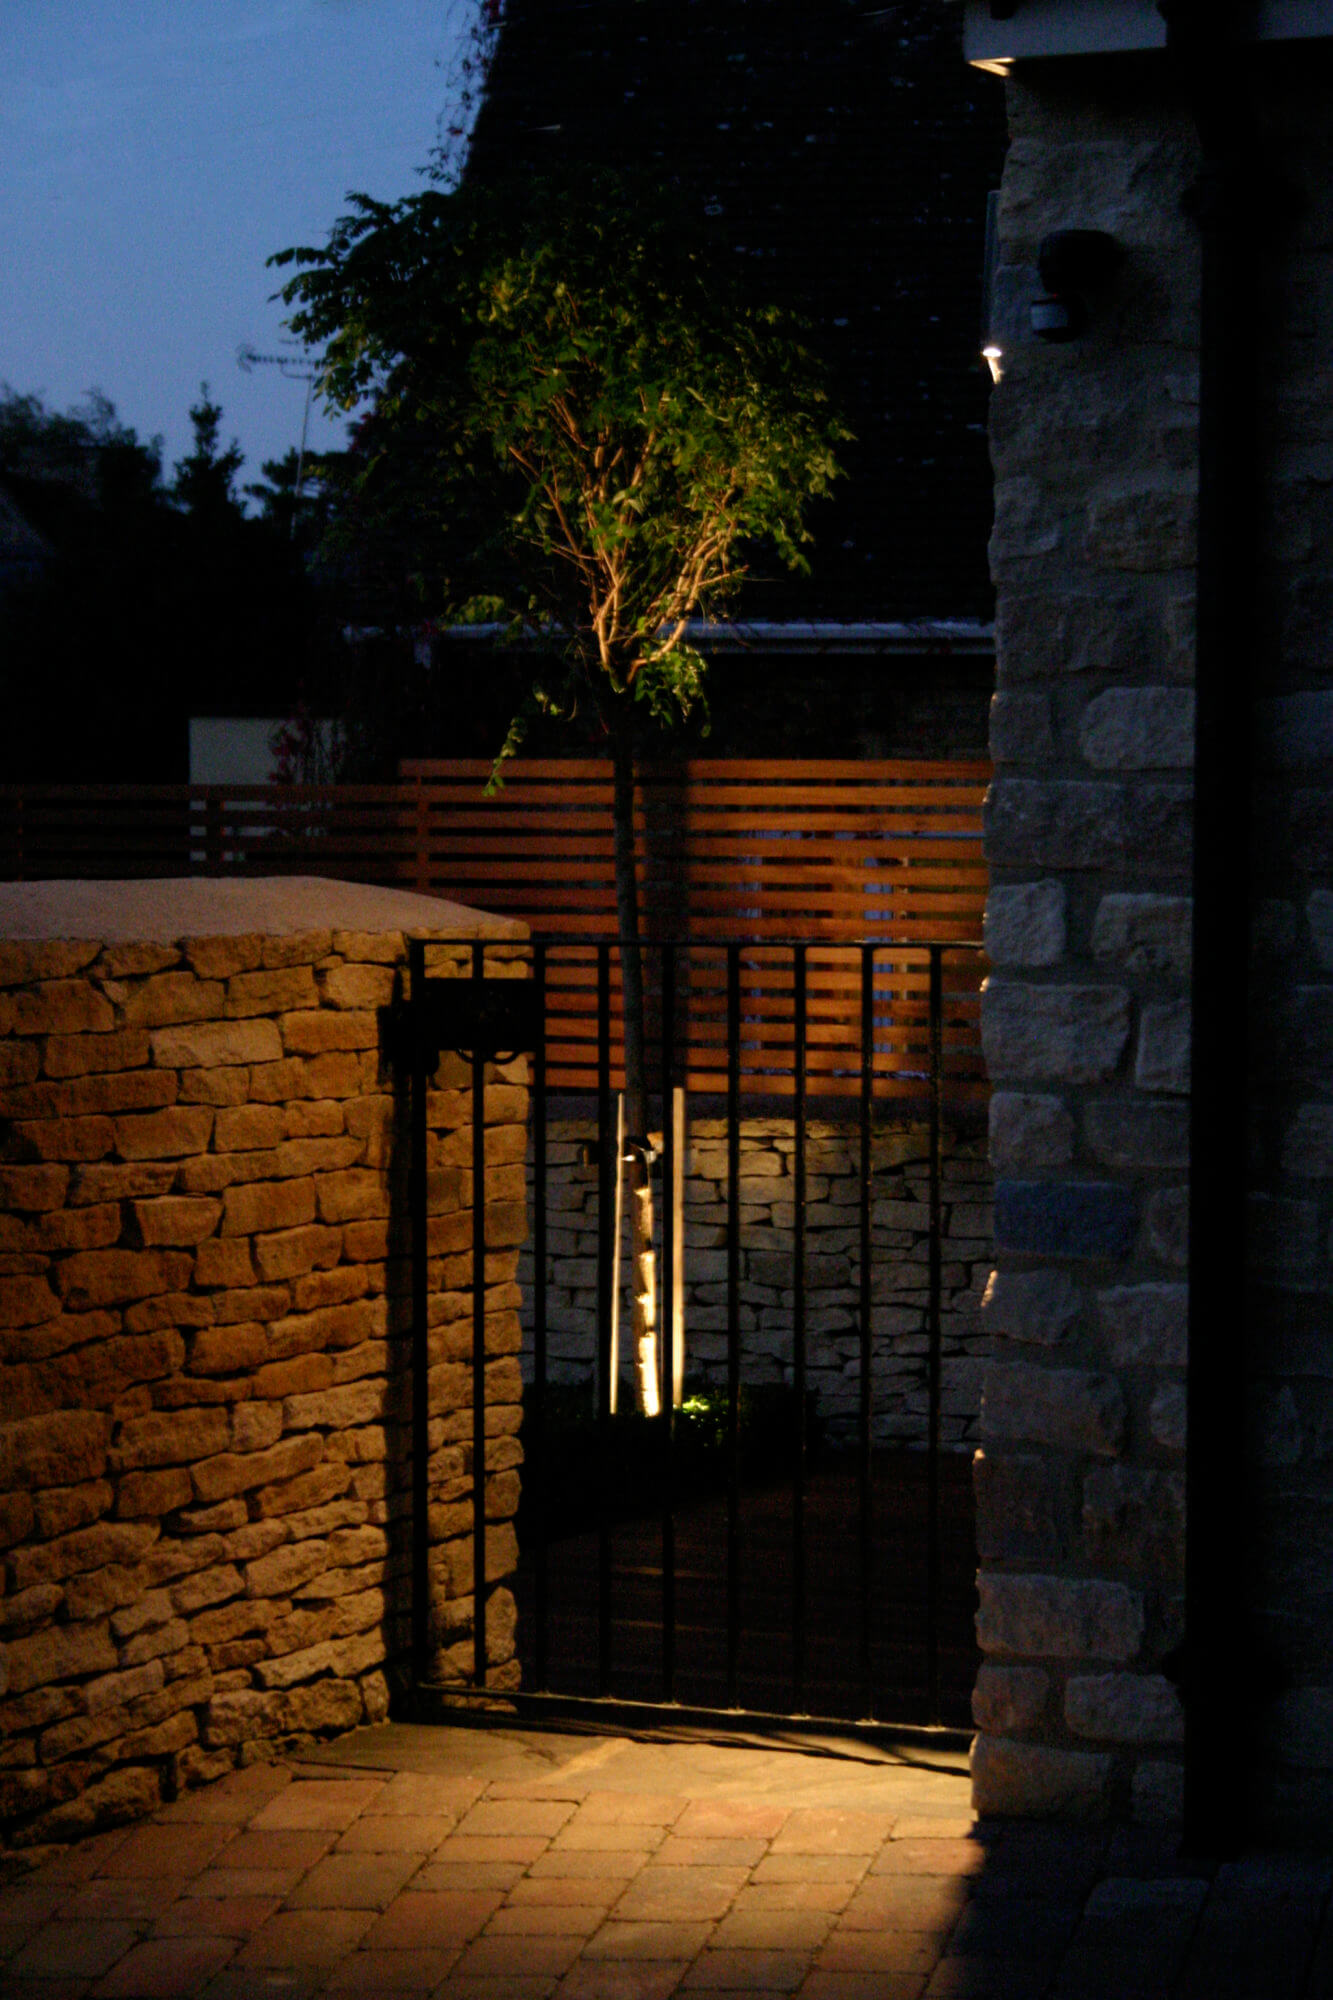 Pedestrian gate with lighting at night